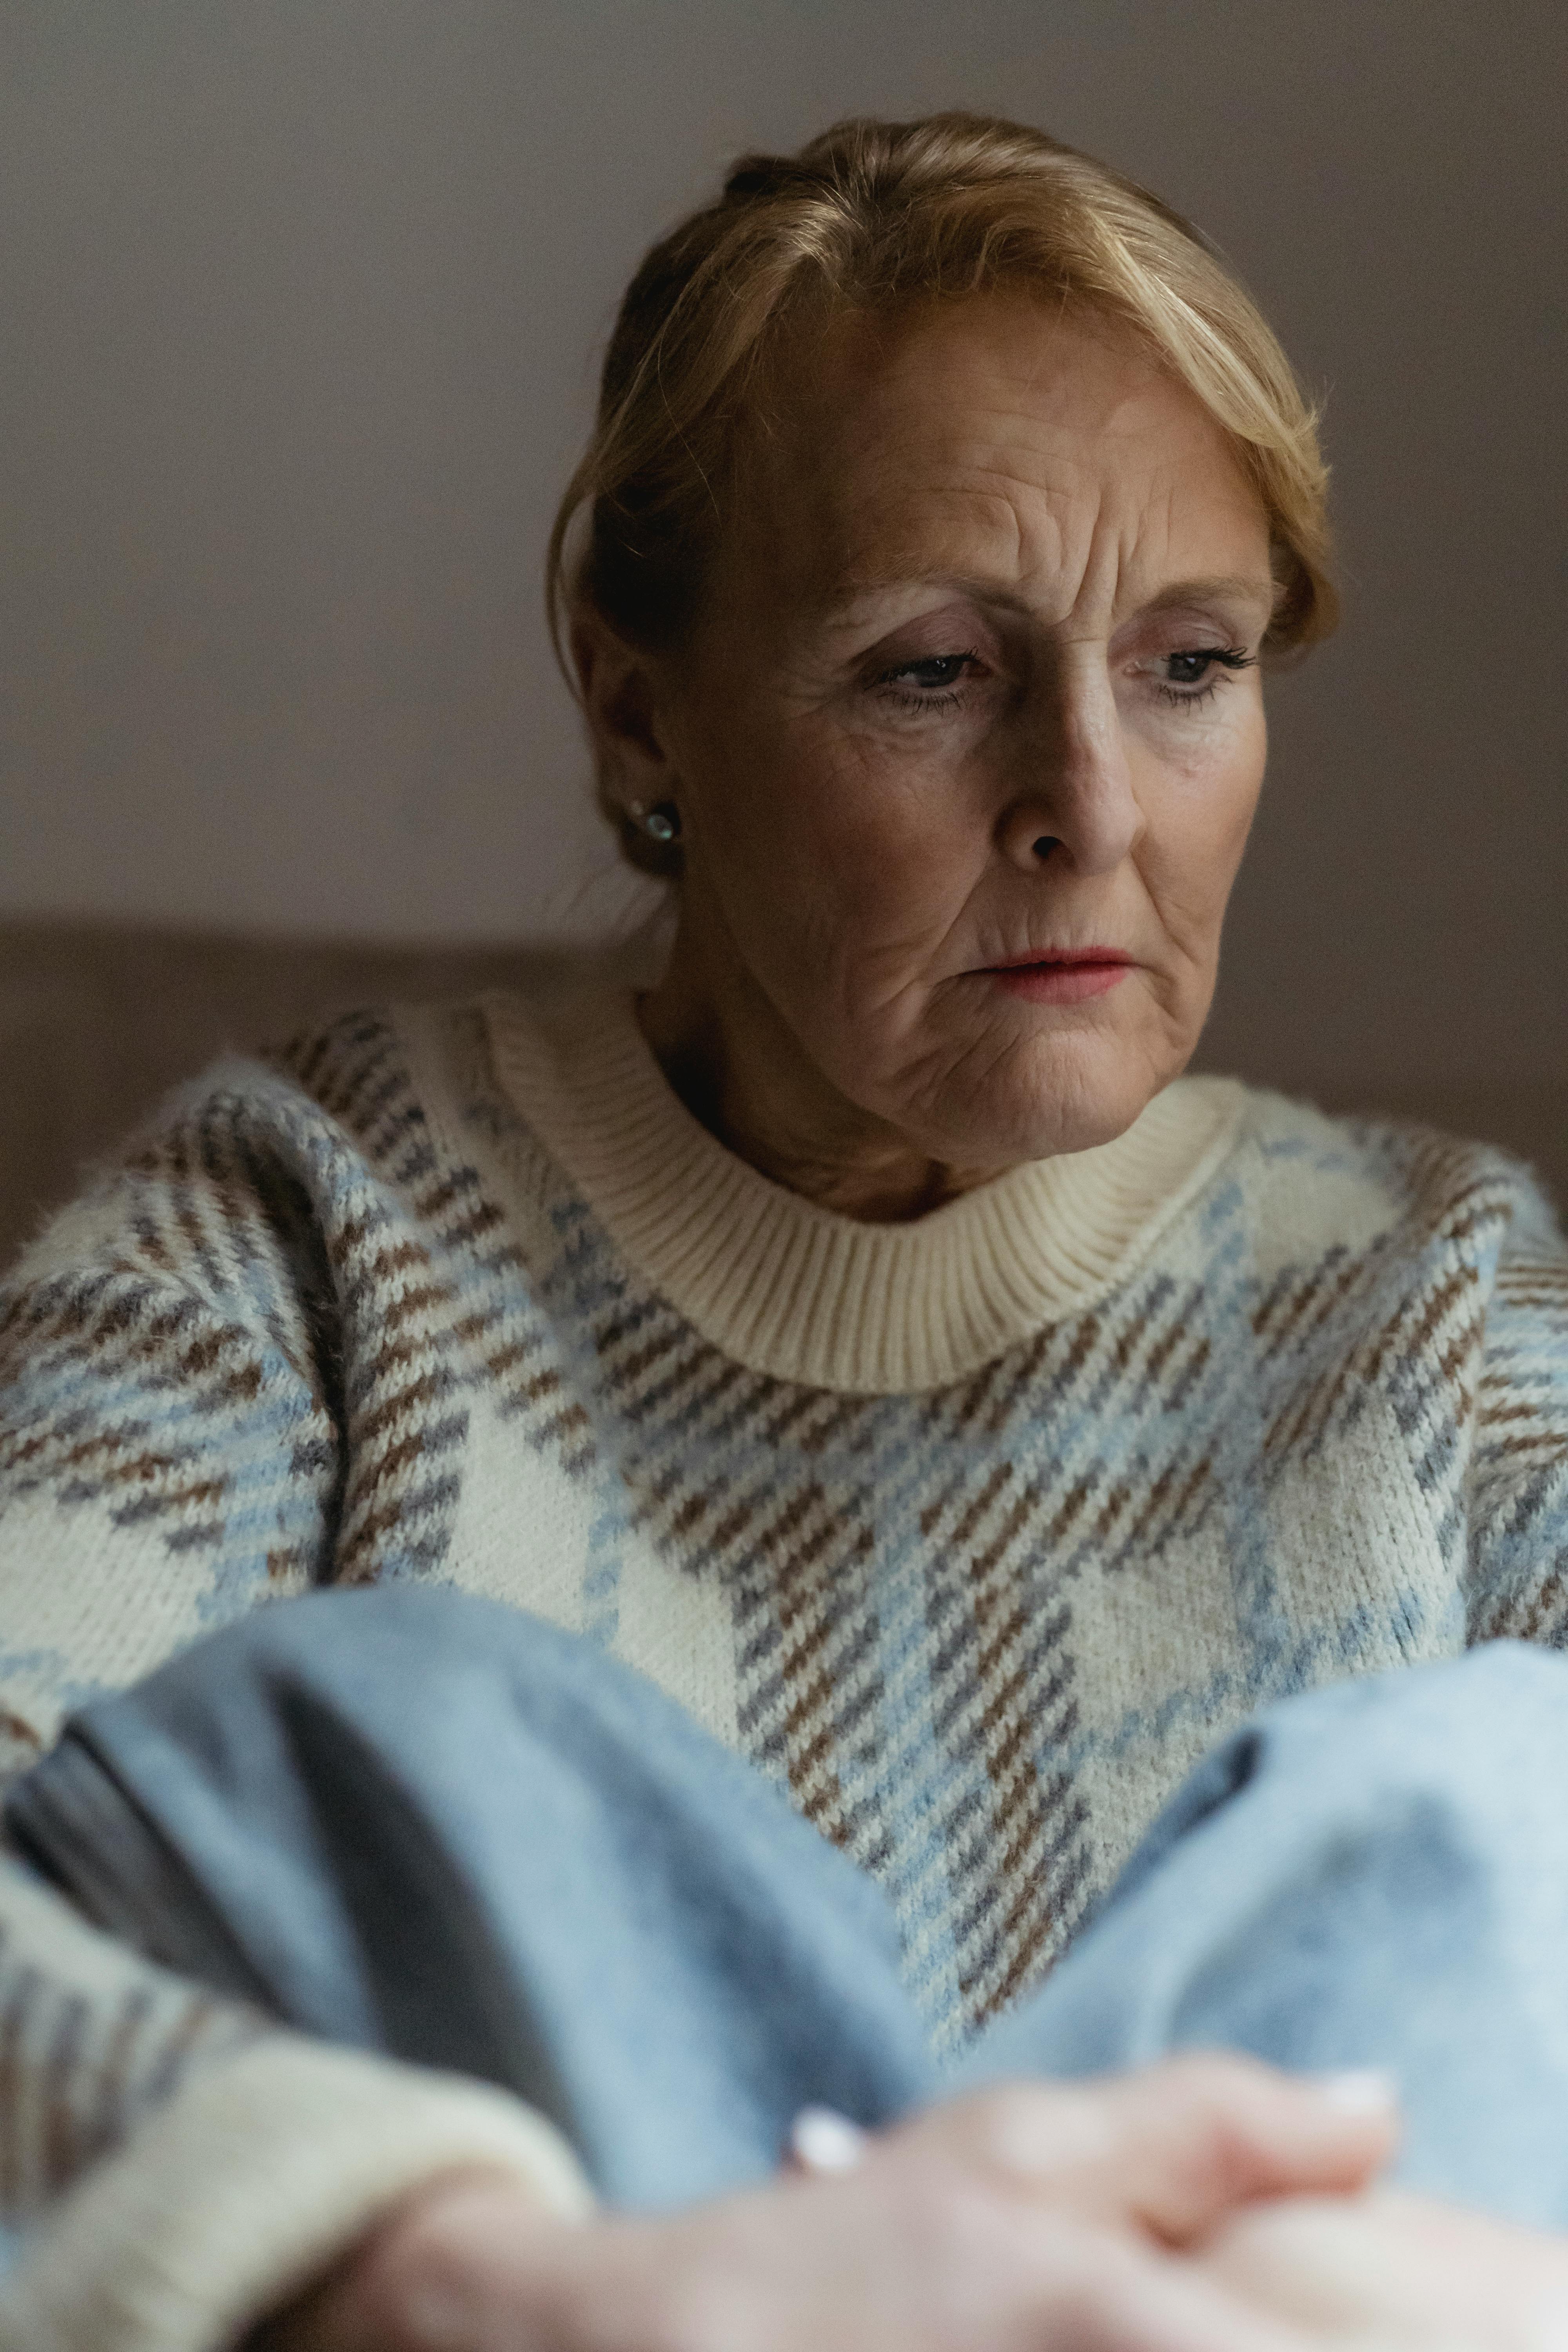 Remorseful middle-aged woman | Source: Pexels